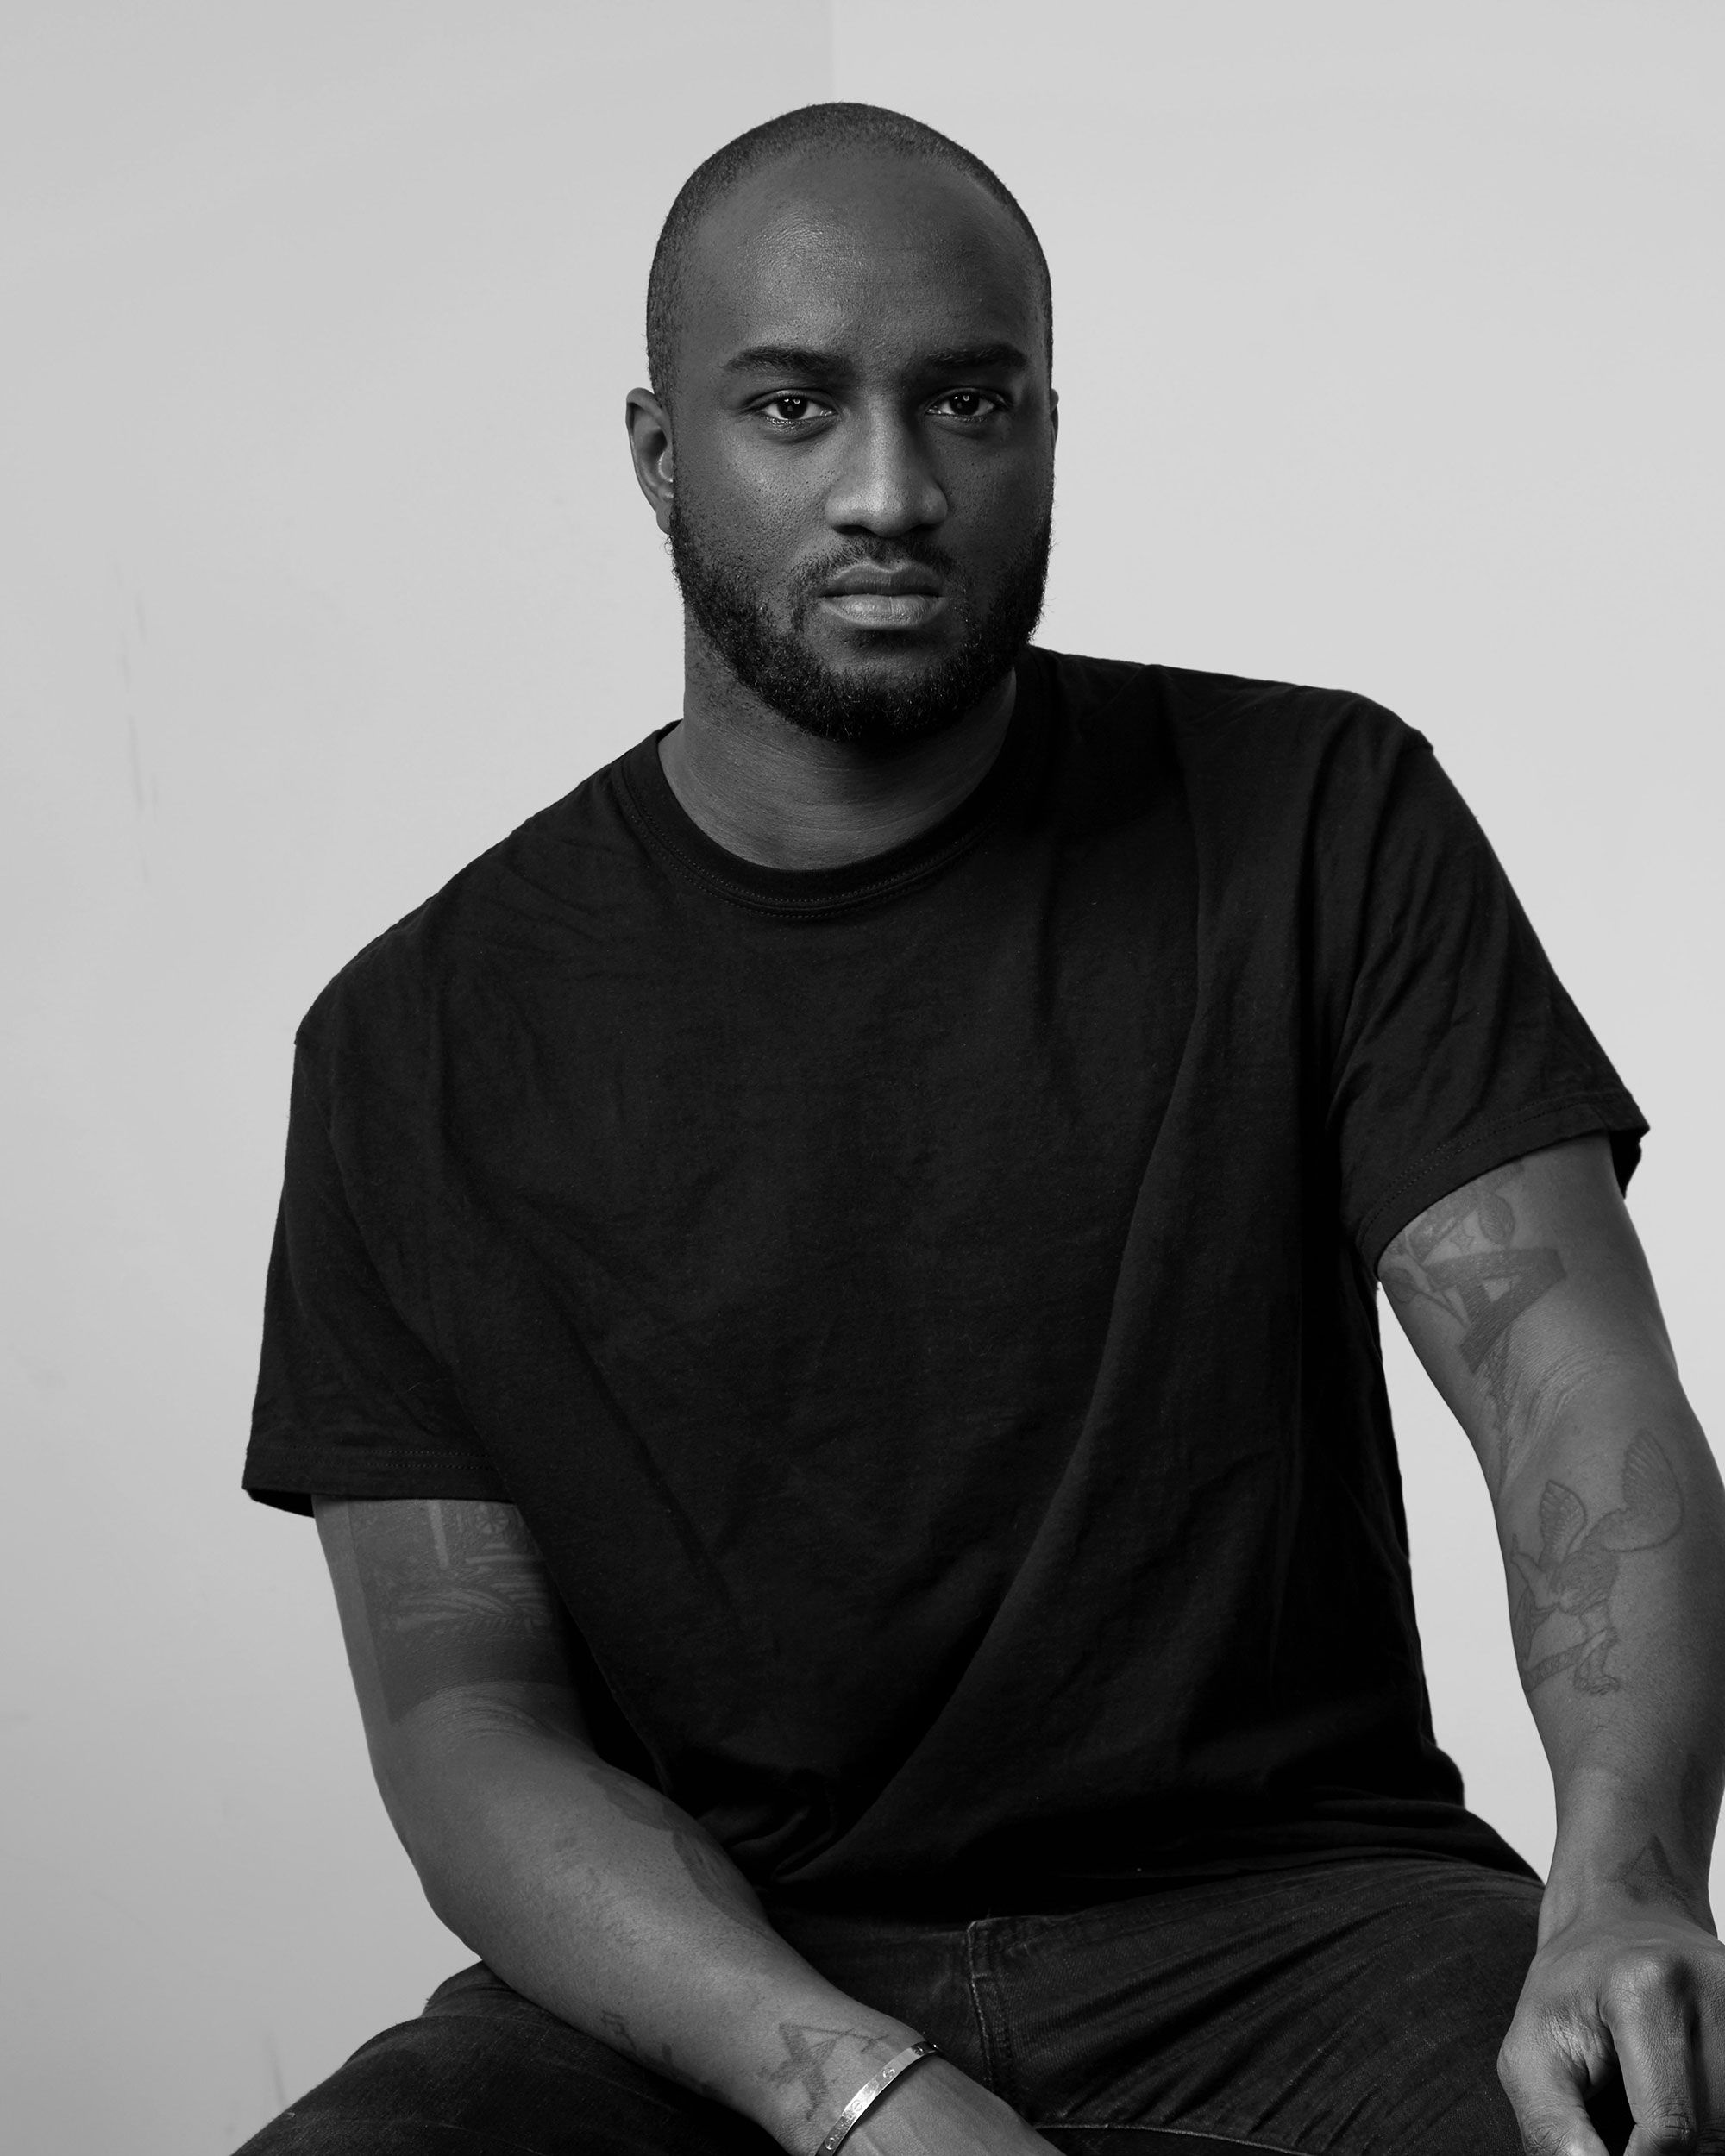 Things to do in New York, Brooklyn Museum Virgil Abloh “Figures of Sp